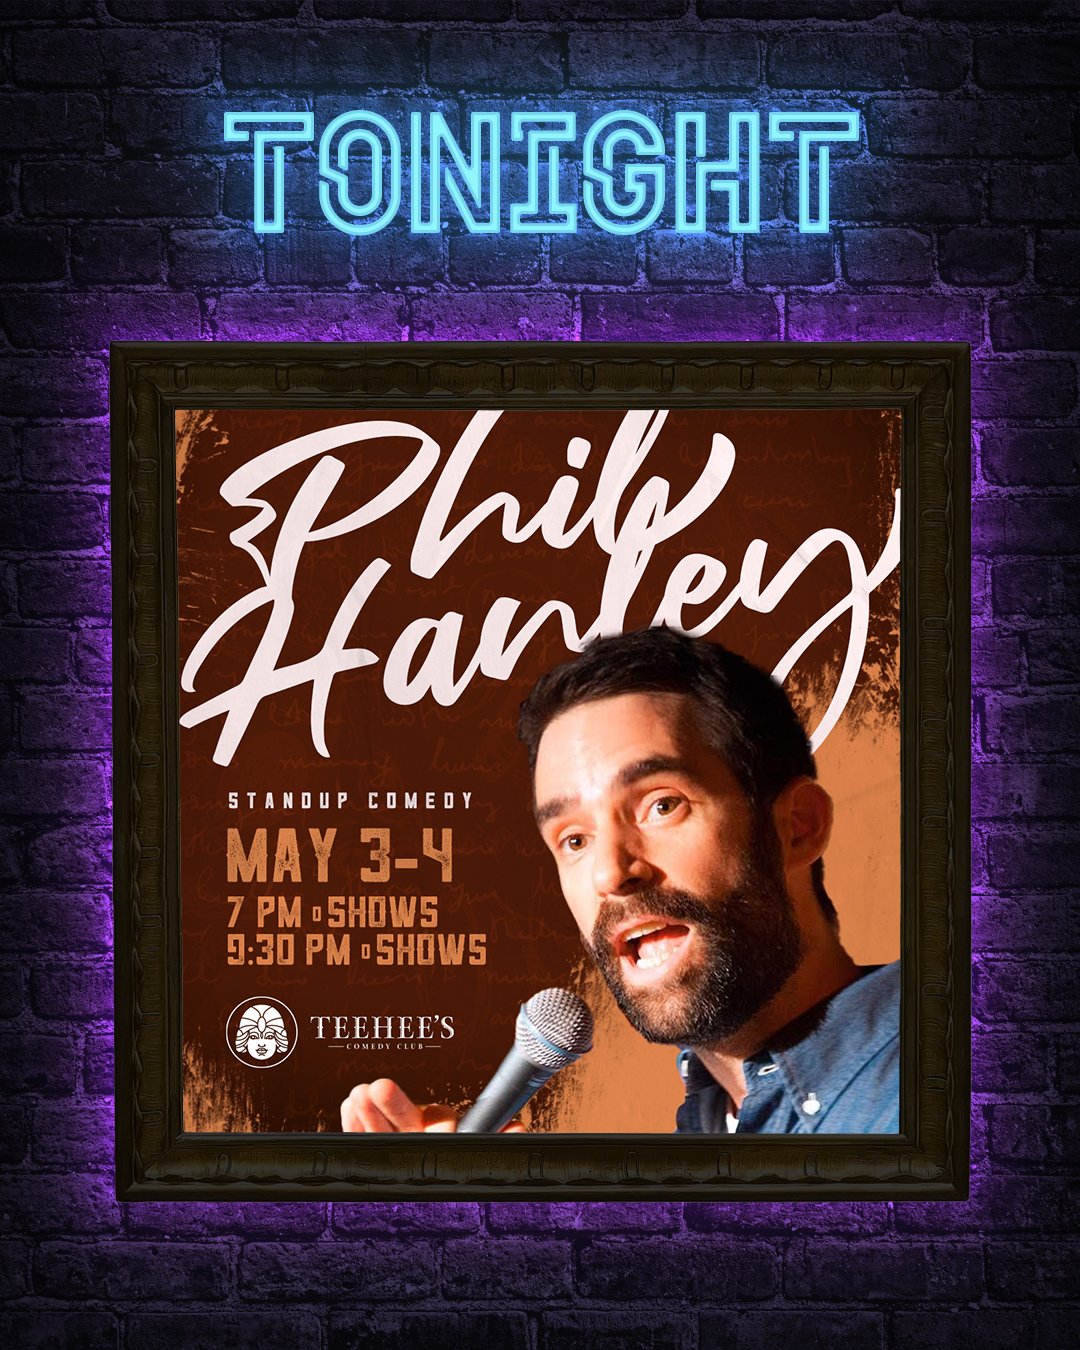 🎤🦩🔥 Phil Hanley is back for a second night, bringing the hilarity!
Both shows are sold out tonight. Limited stool seating at the bar and in the back of the club will be available at the door.